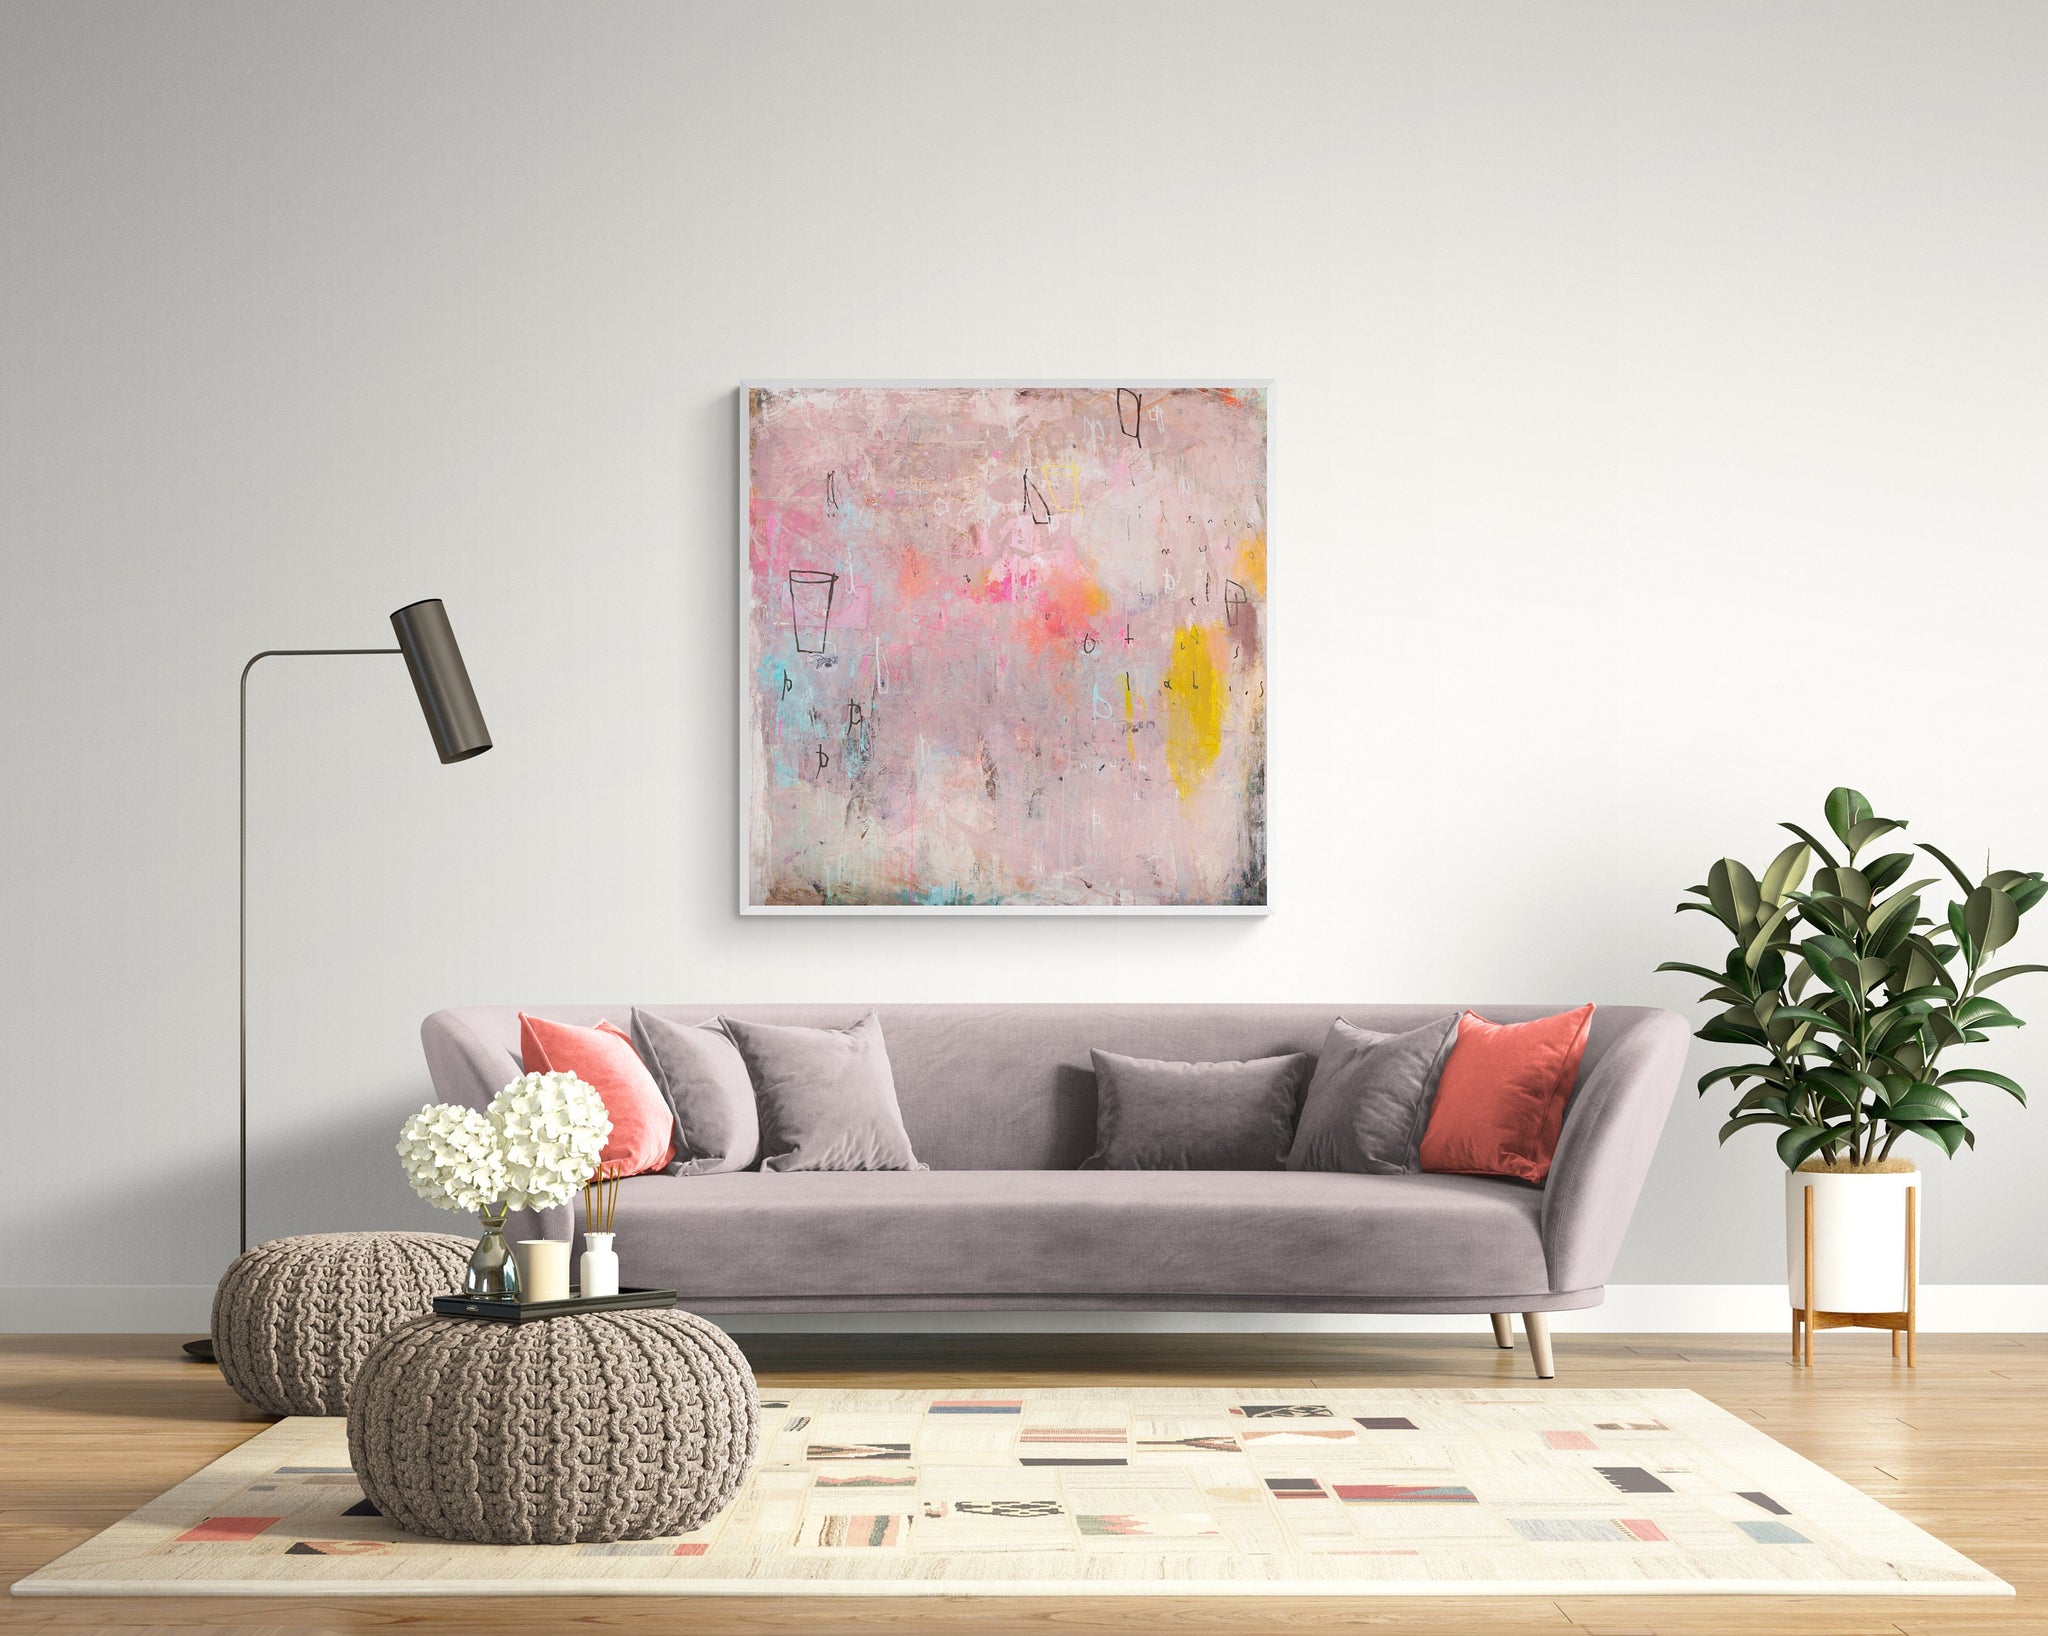 extra large original creative blush pink wall art comfort colors decoration abstract painting